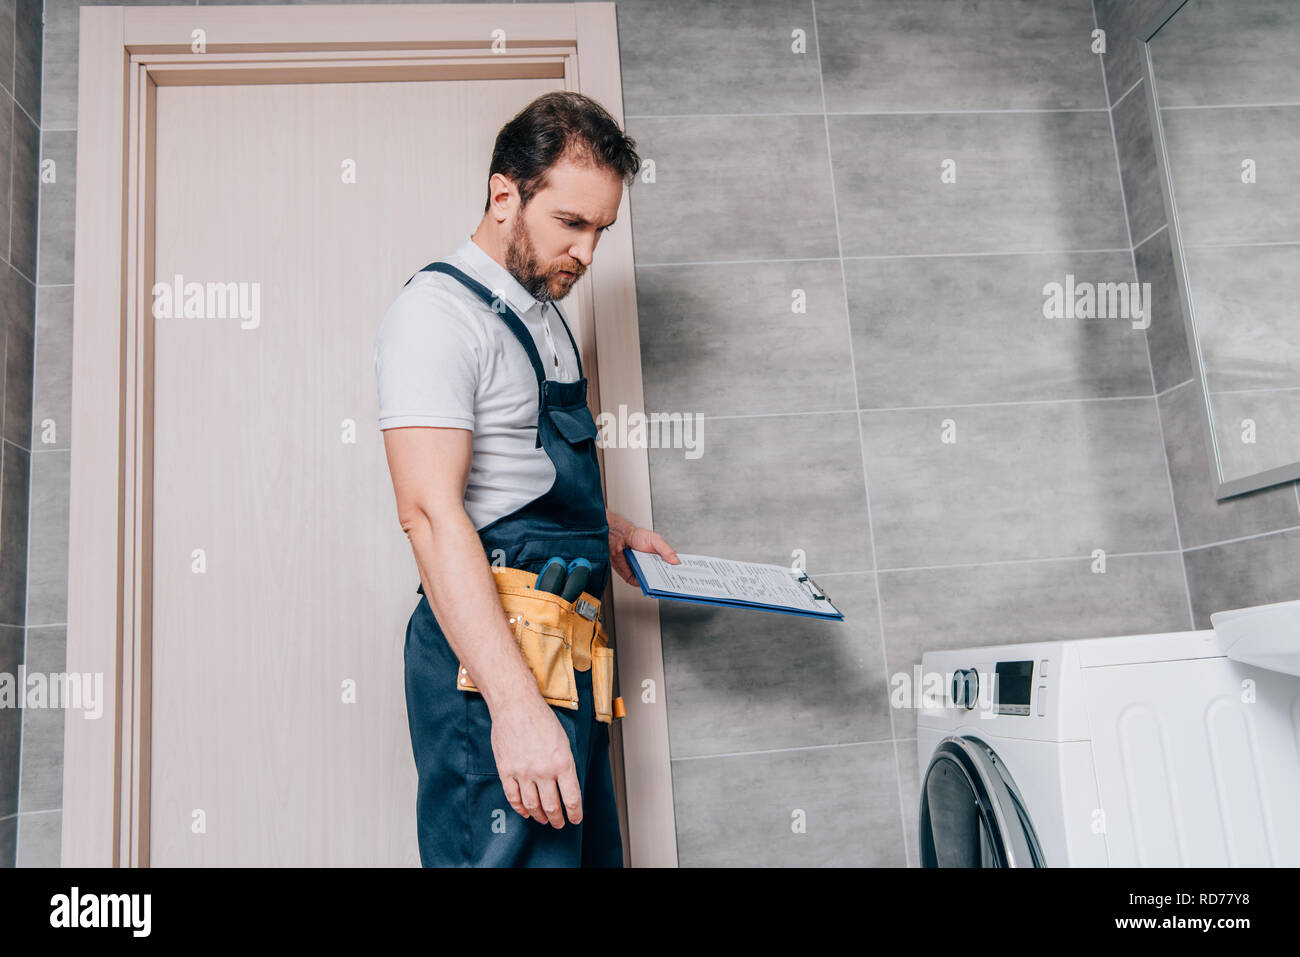 repairman-with-toolbelt-and-clipboard-checking-washing-machine-in-bathroom-RD77Y8.jpg